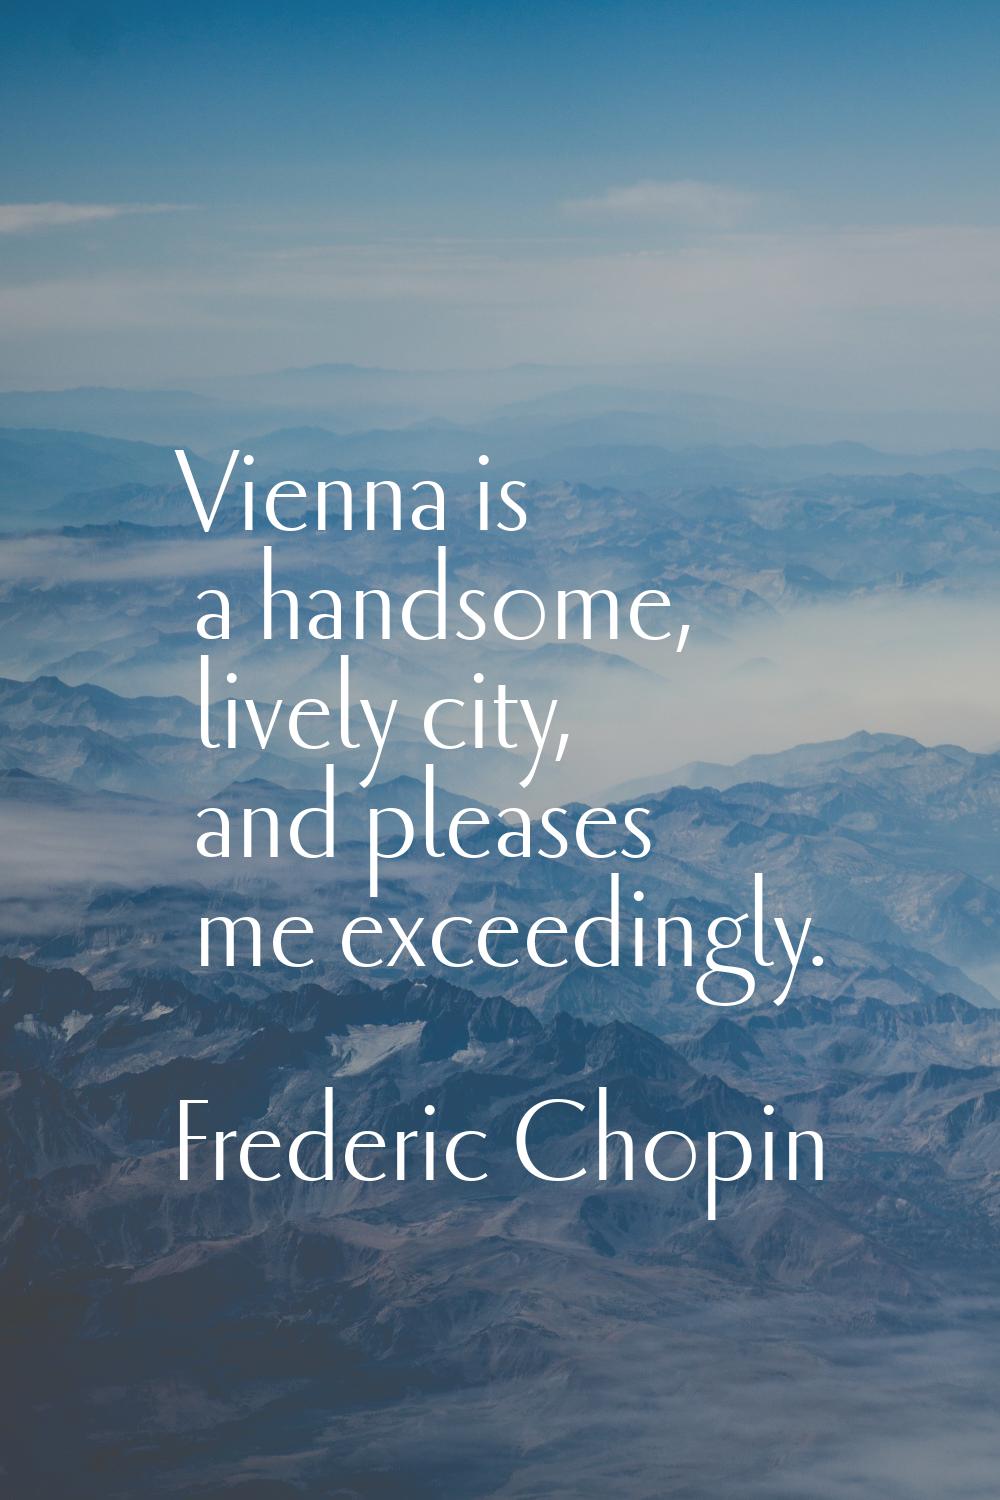 Vienna is a handsome, lively city, and pleases me exceedingly.